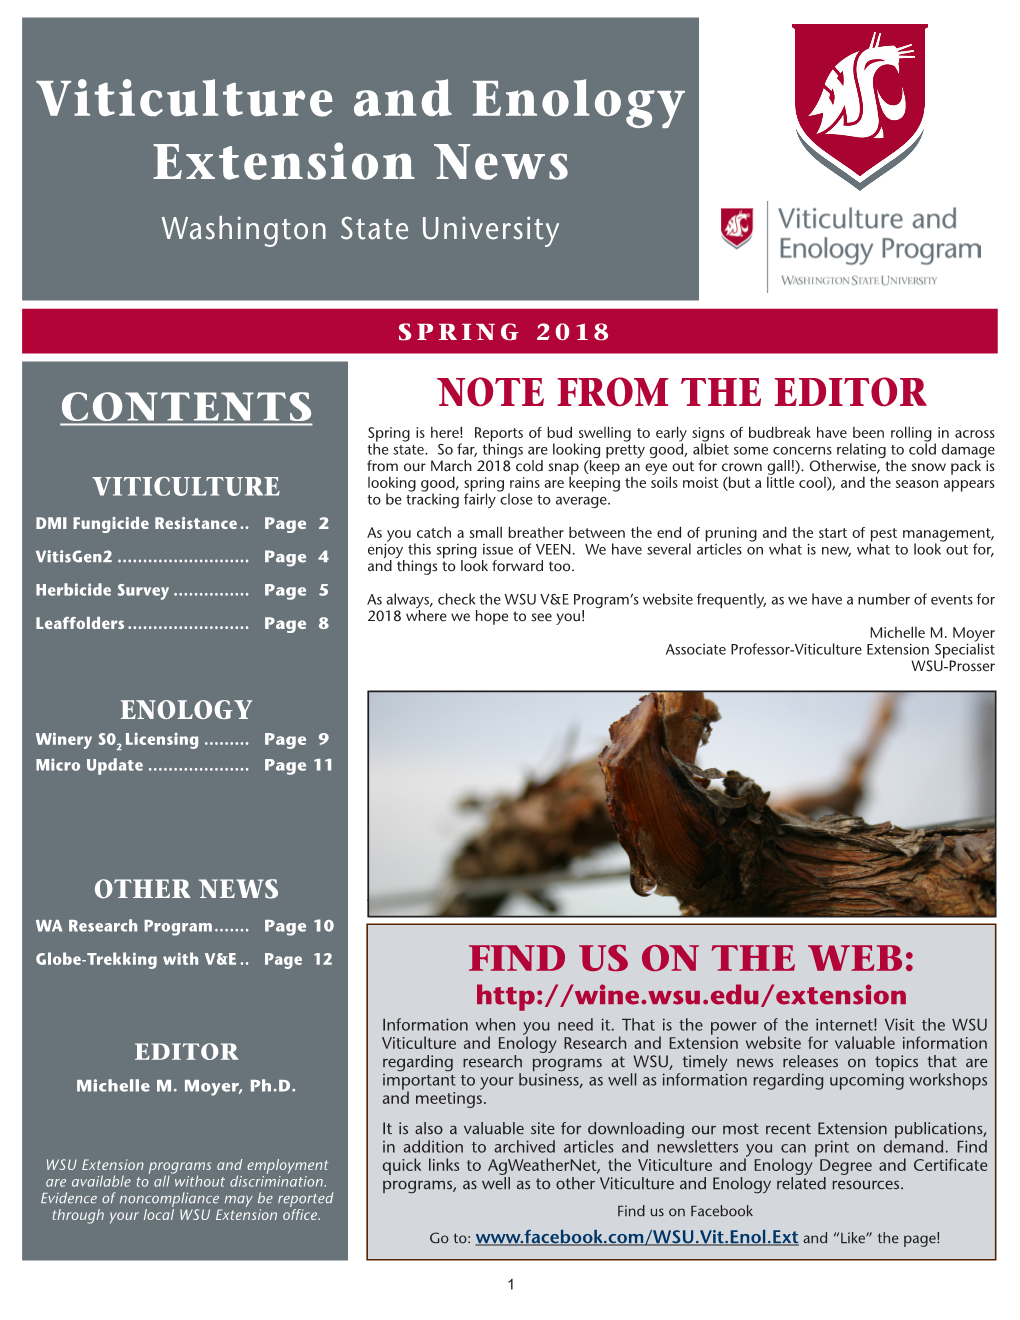 Viticulture and Enology Extension News Washington State University